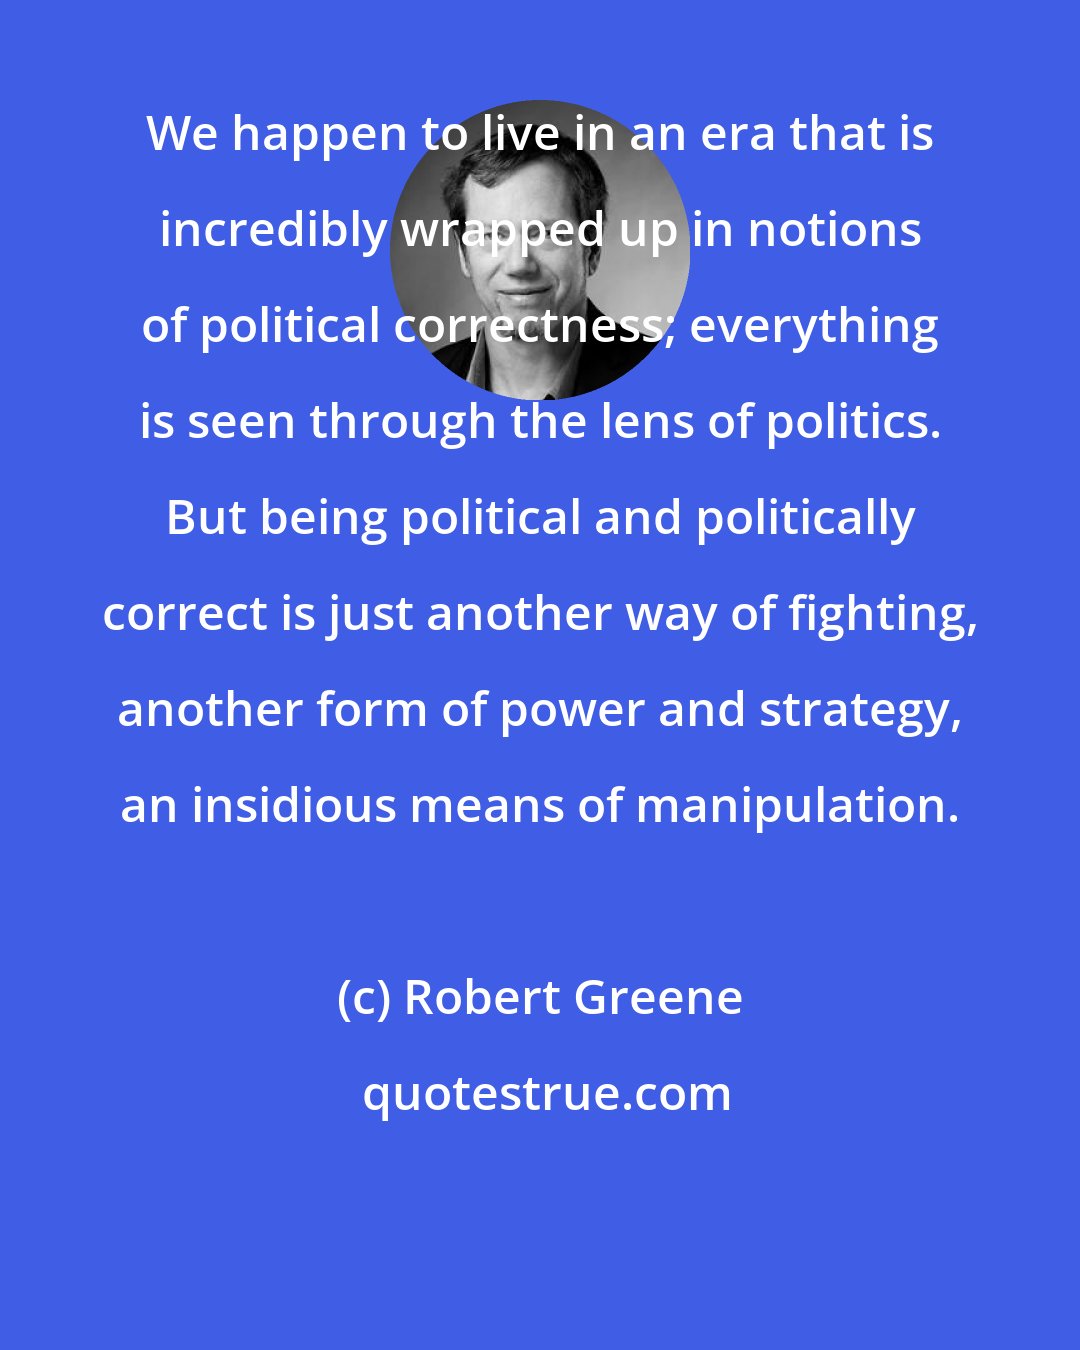 Robert Greene: We happen to live in an era that is incredibly wrapped up in notions of political correctness; everything is seen through the lens of politics. But being political and politically correct is just another way of fighting, another form of power and strategy, an insidious means of manipulation.